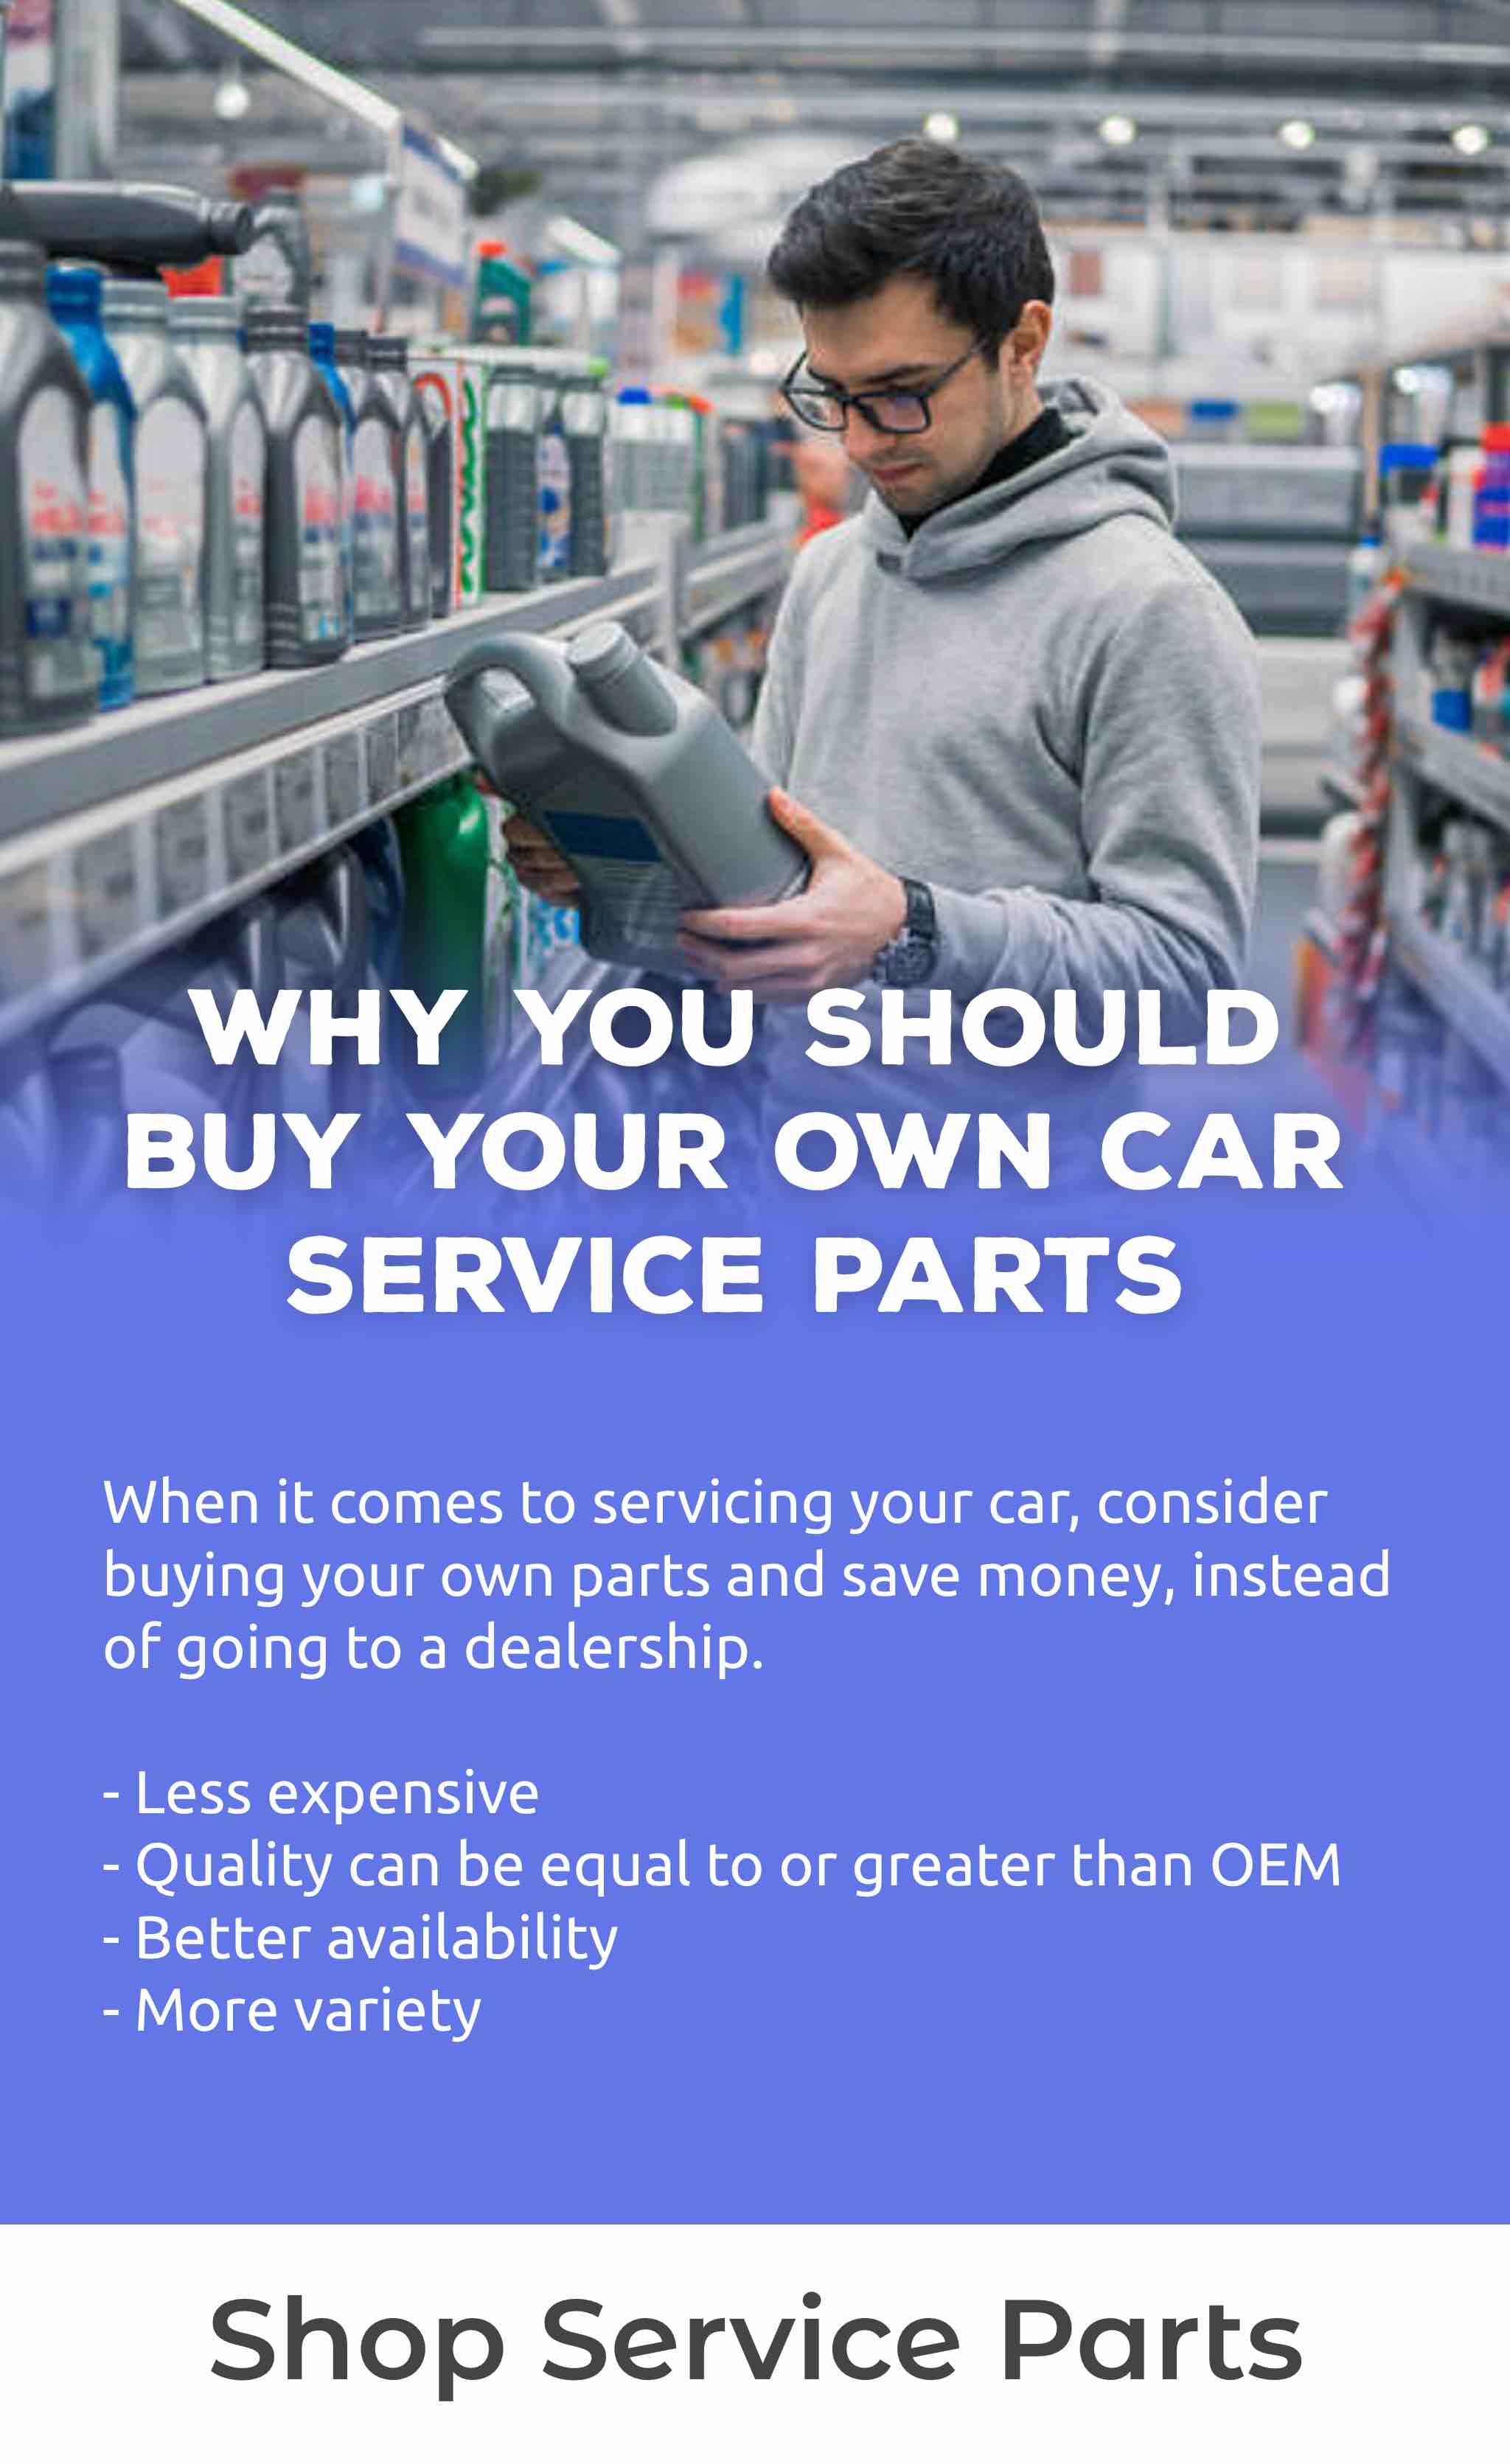 When it comes to servicing your car, consider buying your own parts and save money, instead of going to a dealership.